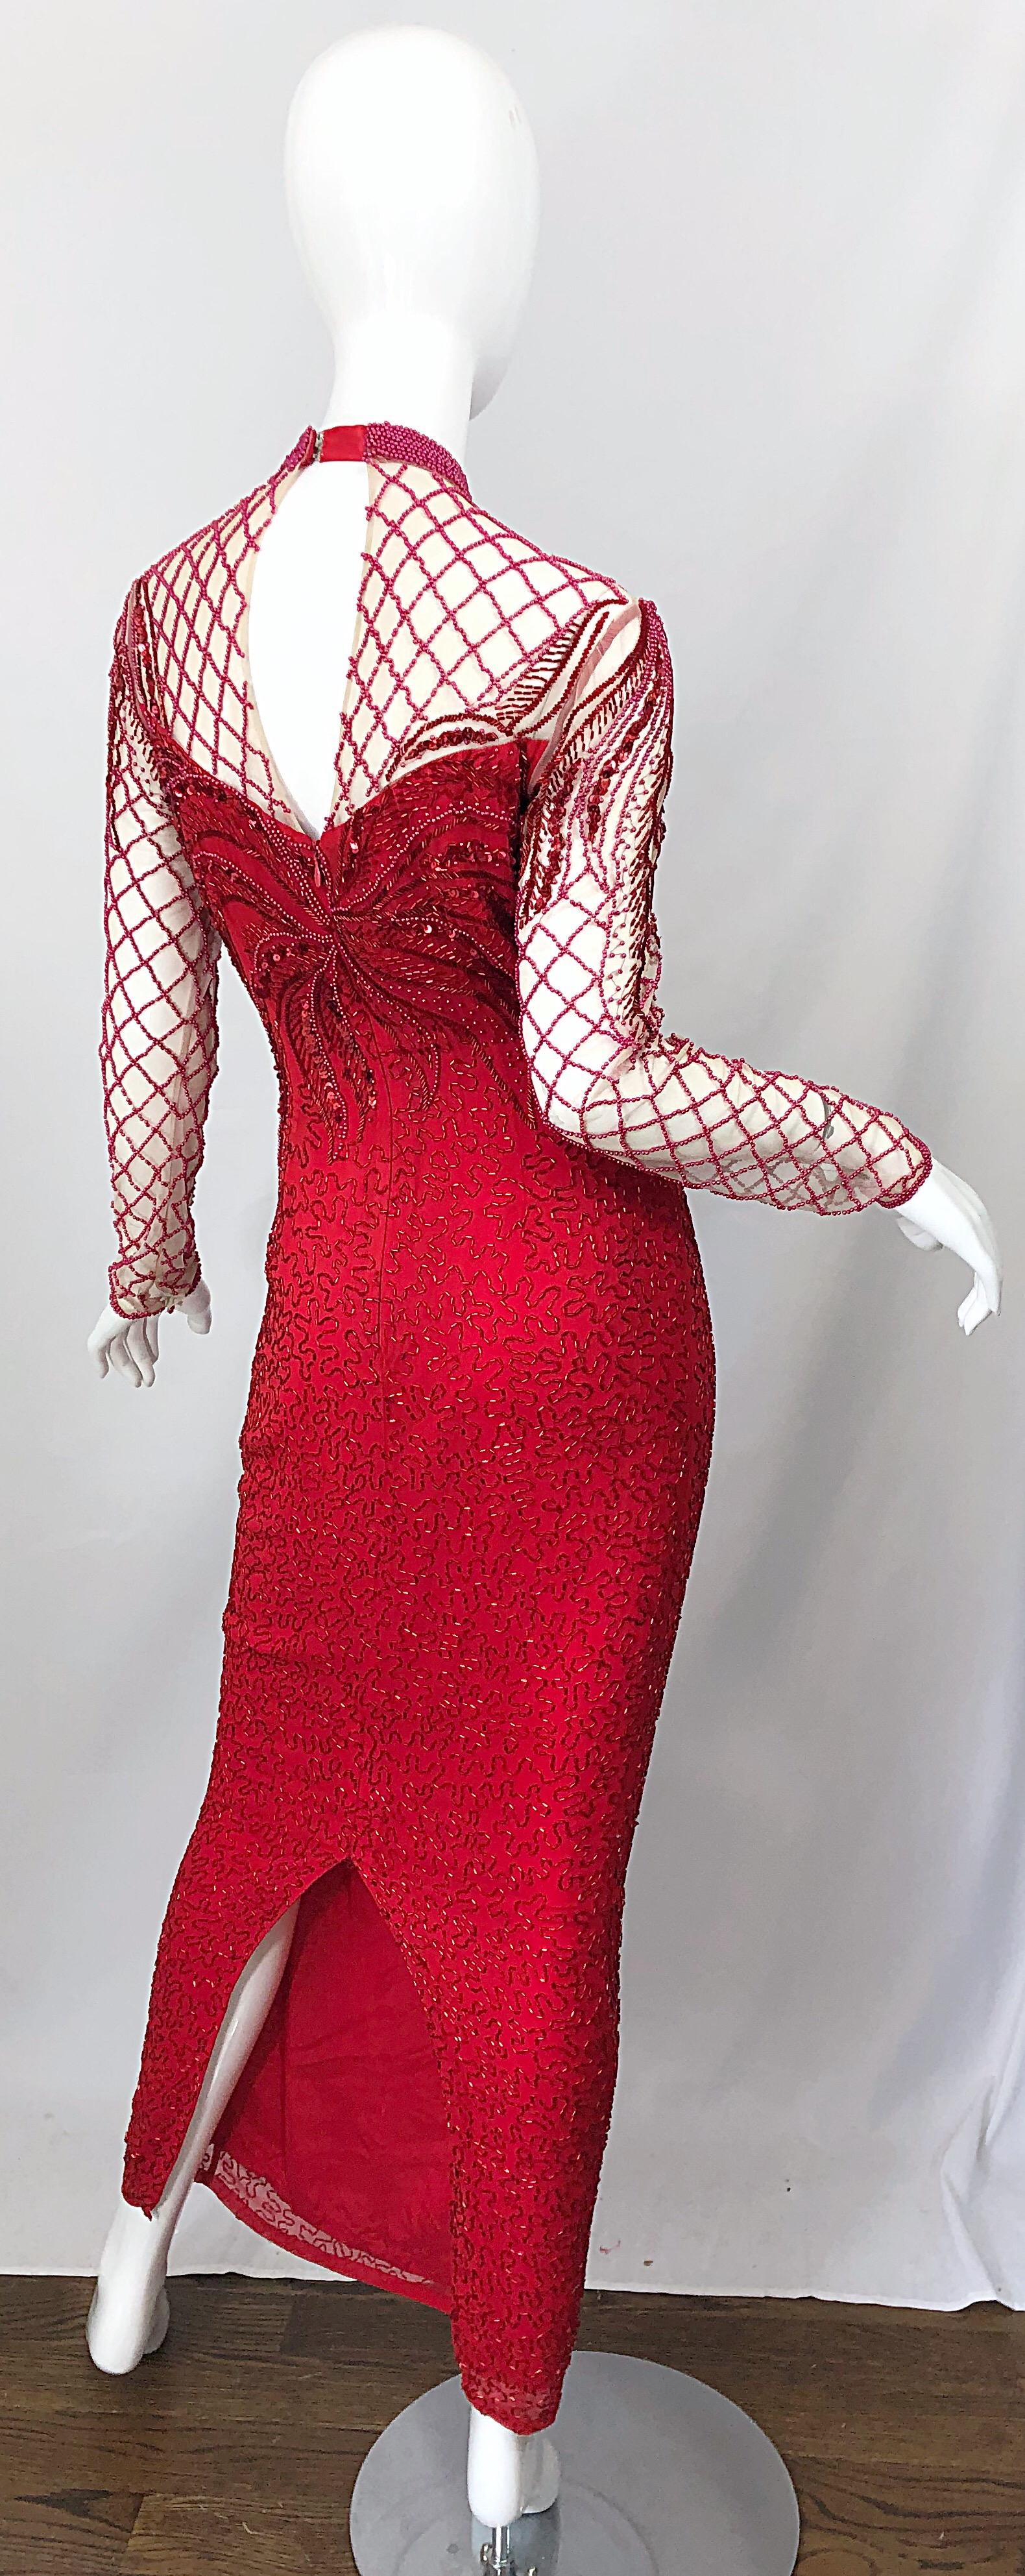 Vintage Oleg Cassini 1990s Lipstick Red Beaded Silk Chiffon 90s Evening Gown For Sale 2